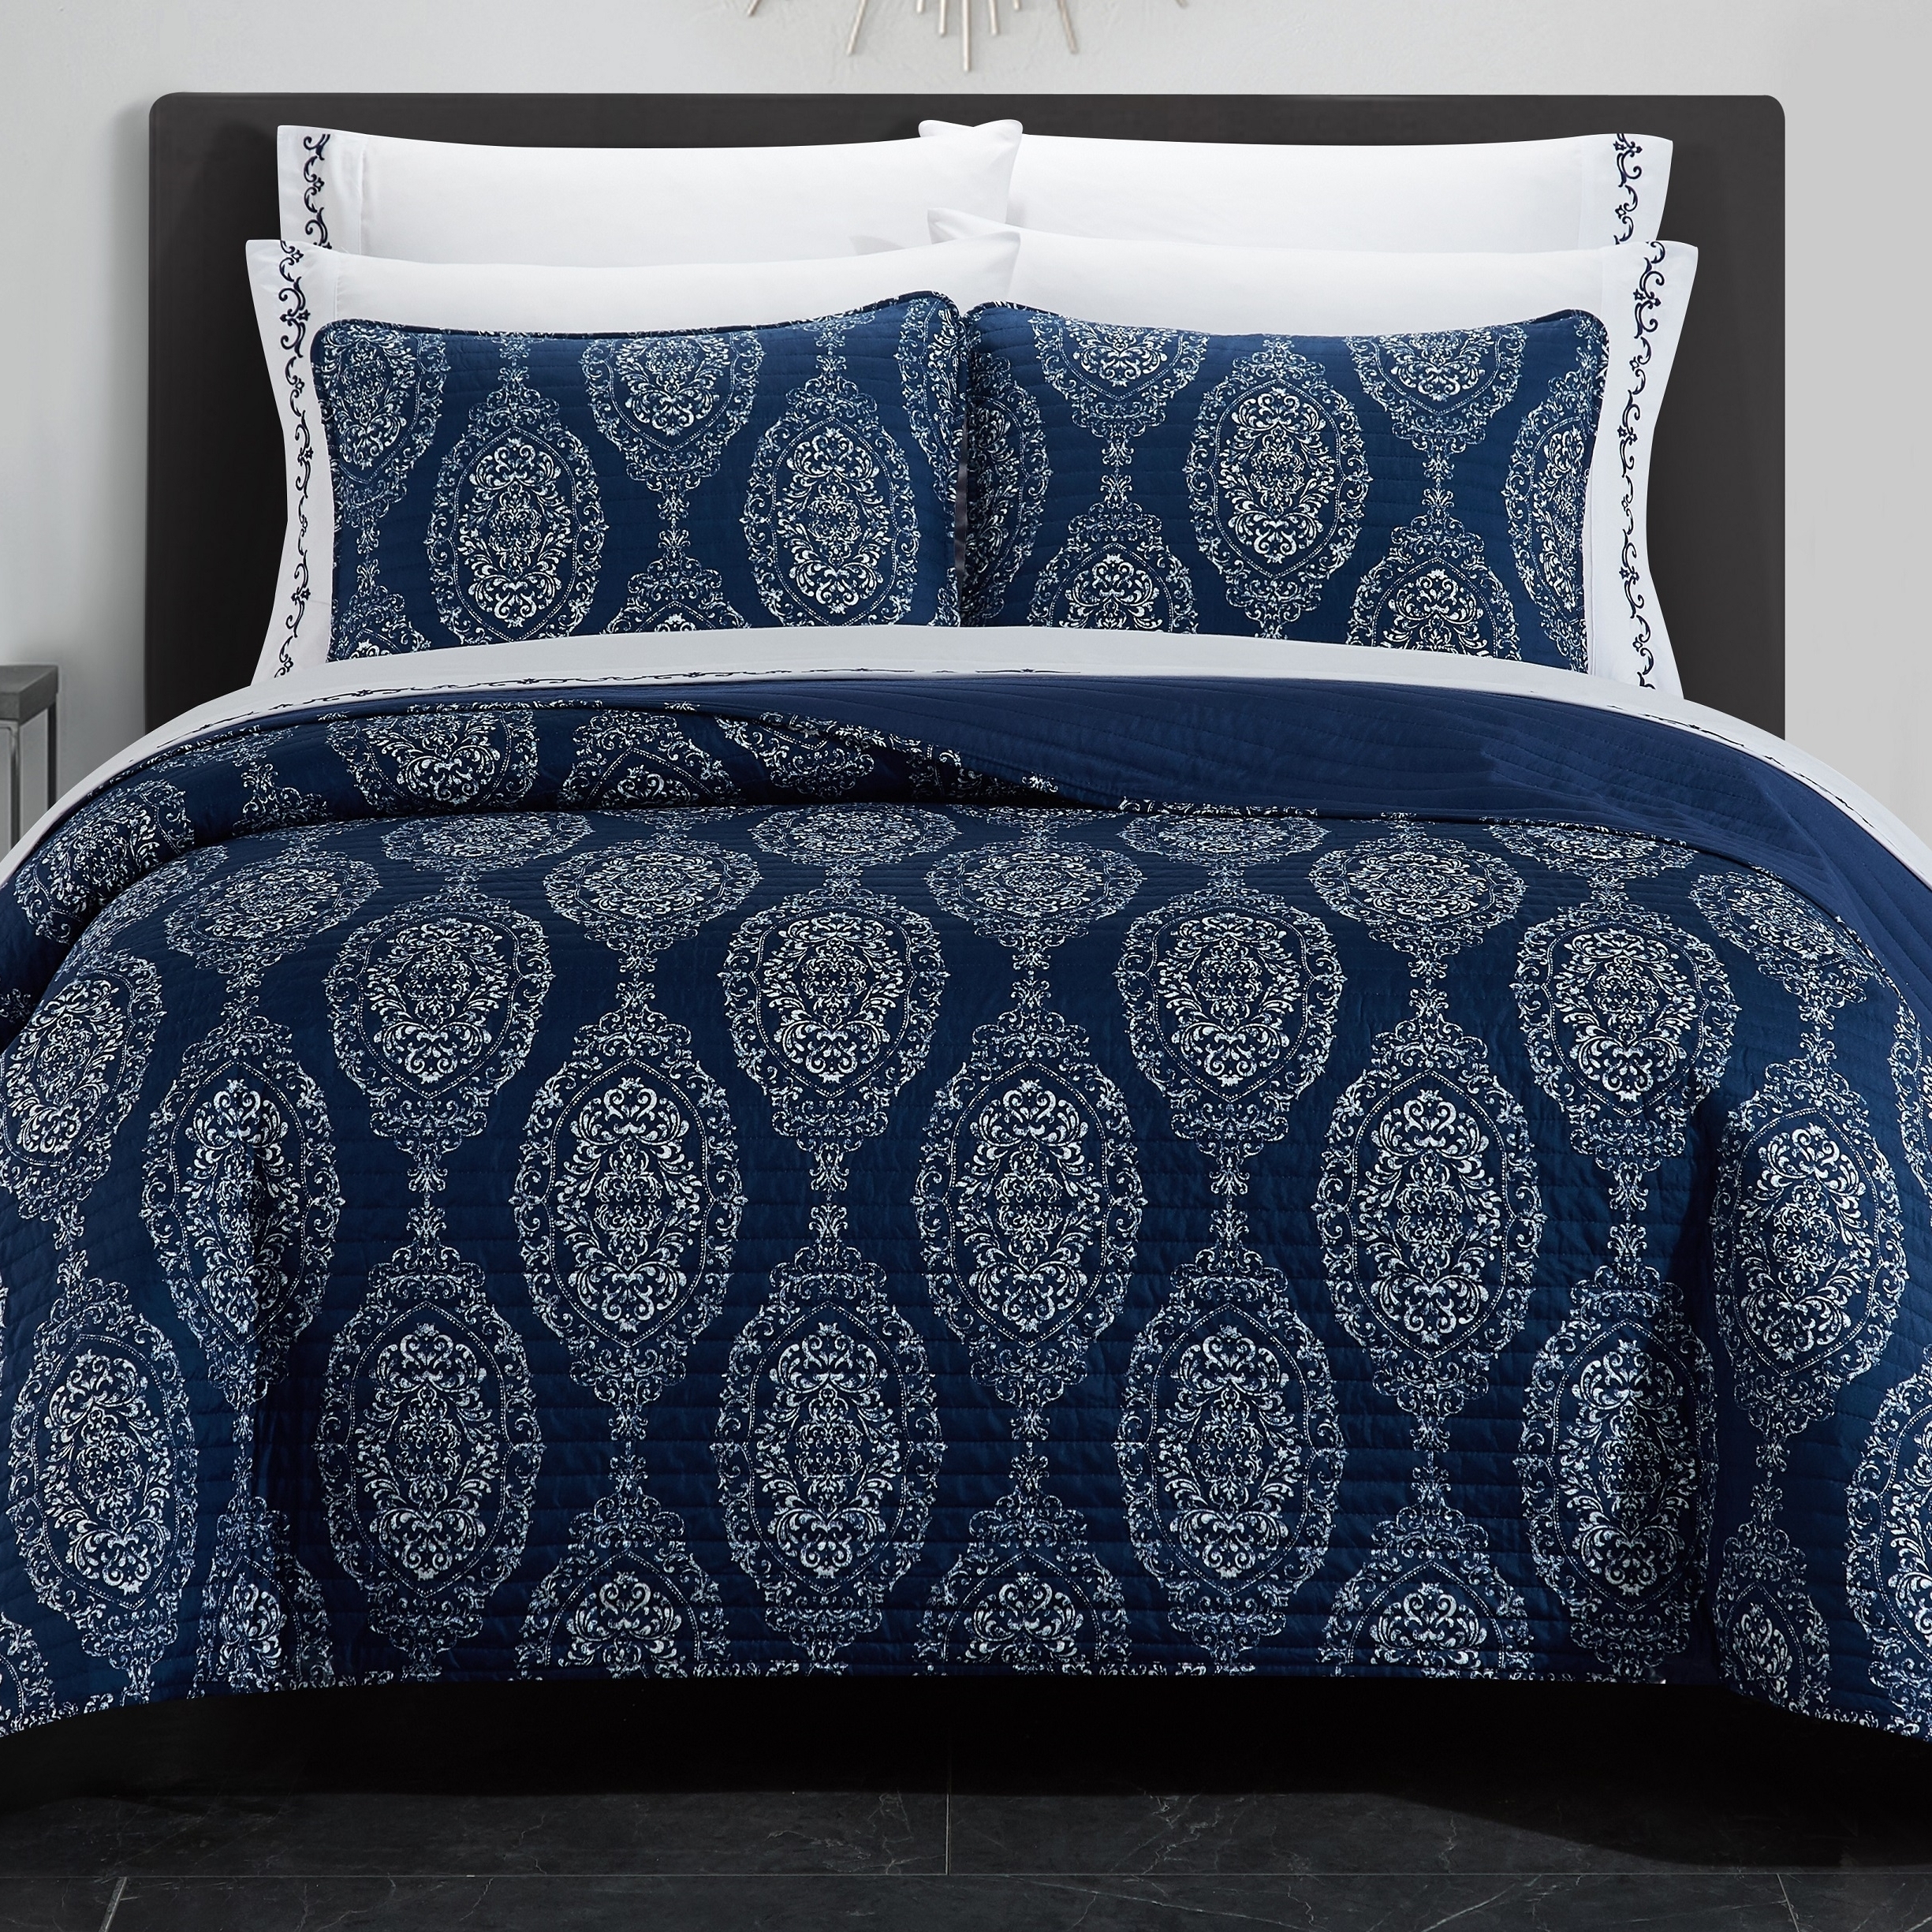 9 Or 6 Piece Quilt Set Medallion Or Floral Pattern Print Reversible Bed In A Bag - Navy, Queen